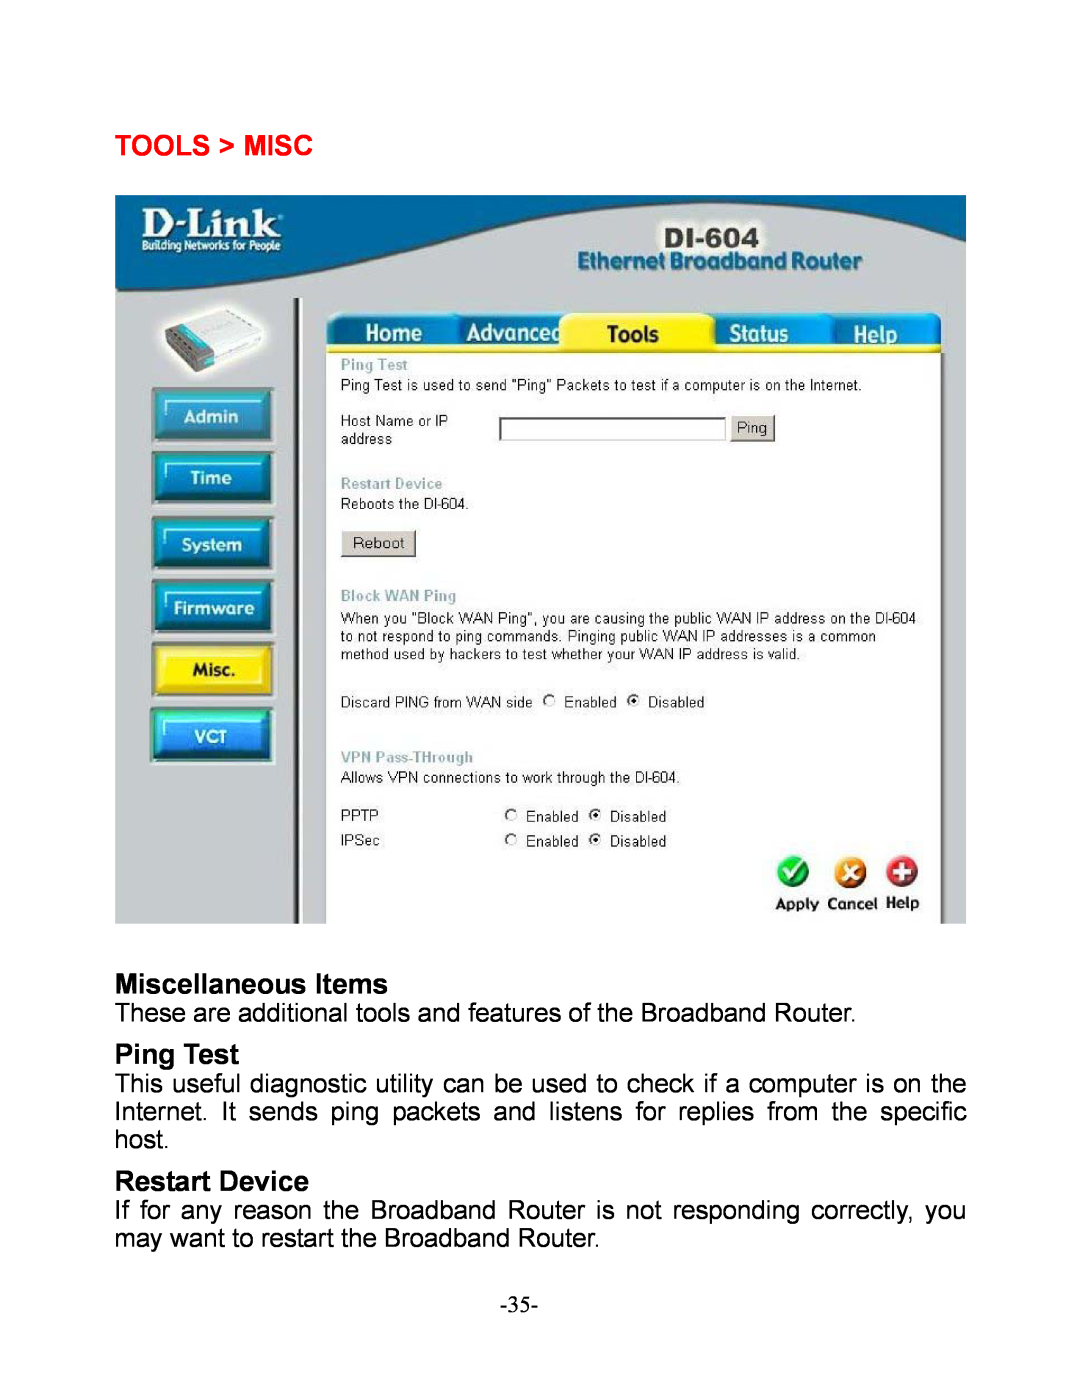 D-Link DI-604 manual Tools Misc, Miscellaneous Items, Ping Test, Restart Device 